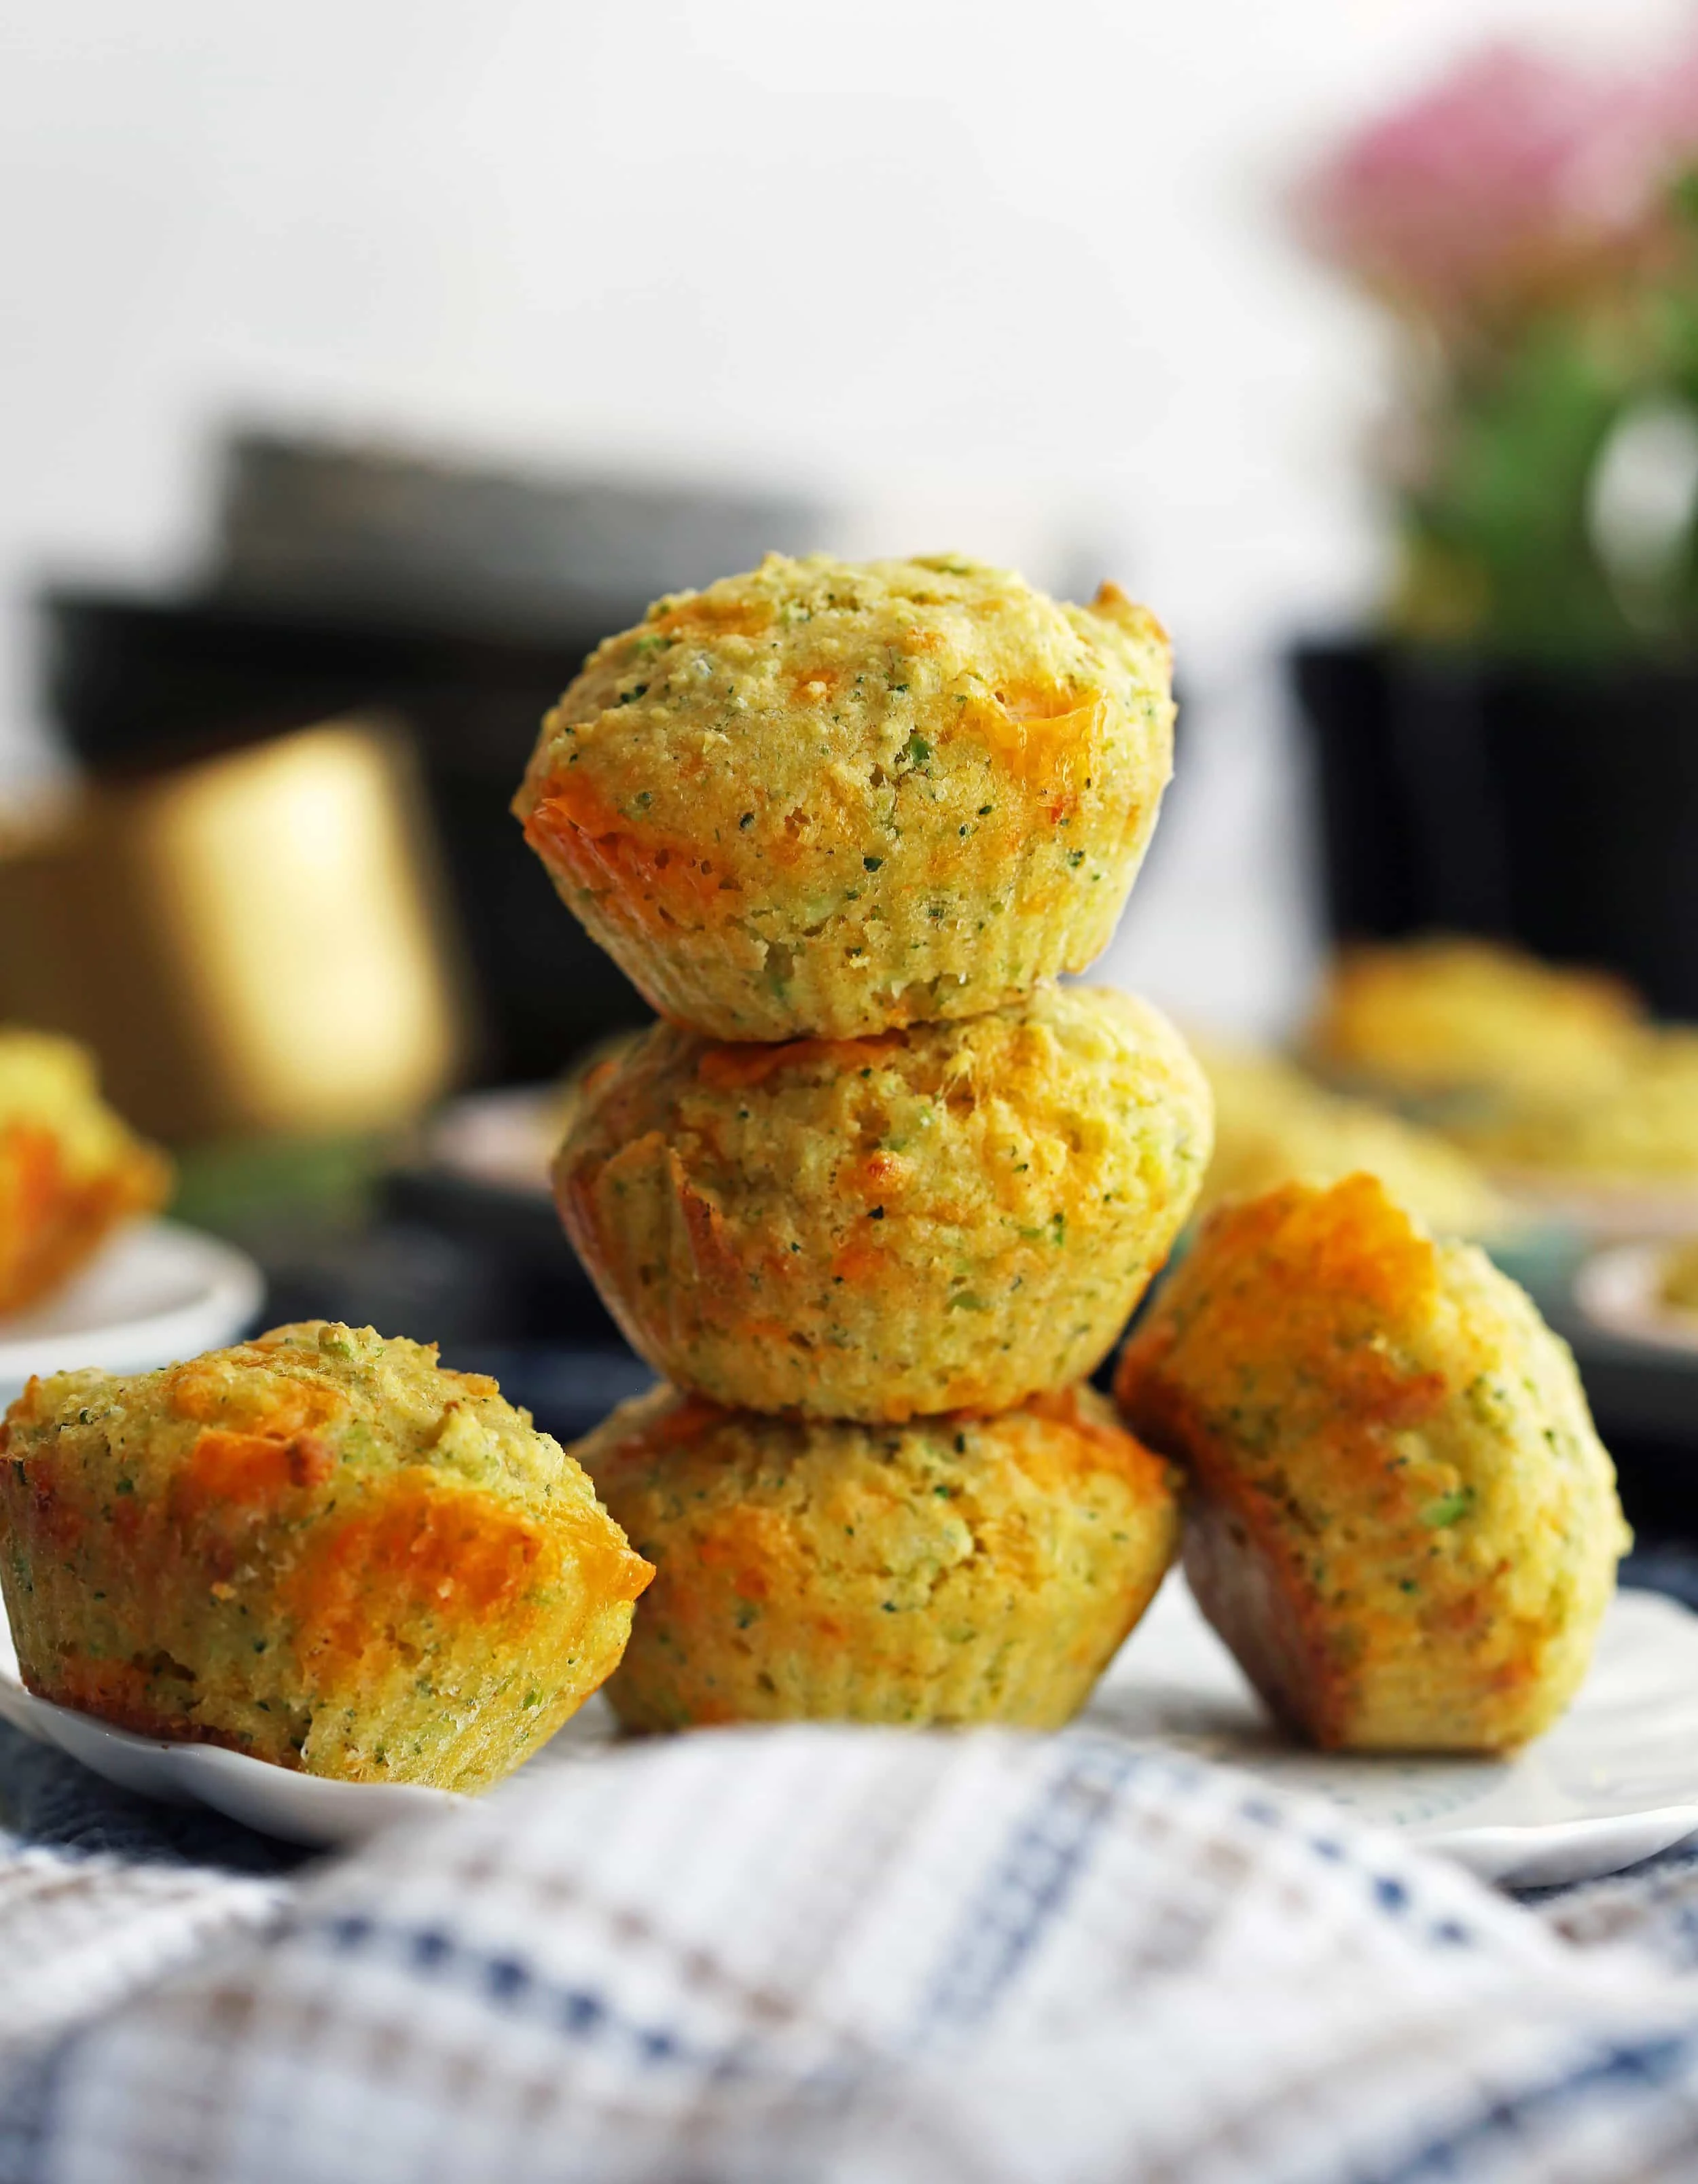 A side view of three Broccoli Cheddar Cornbread Muffins stacked on top one another with two more muffins on the side.